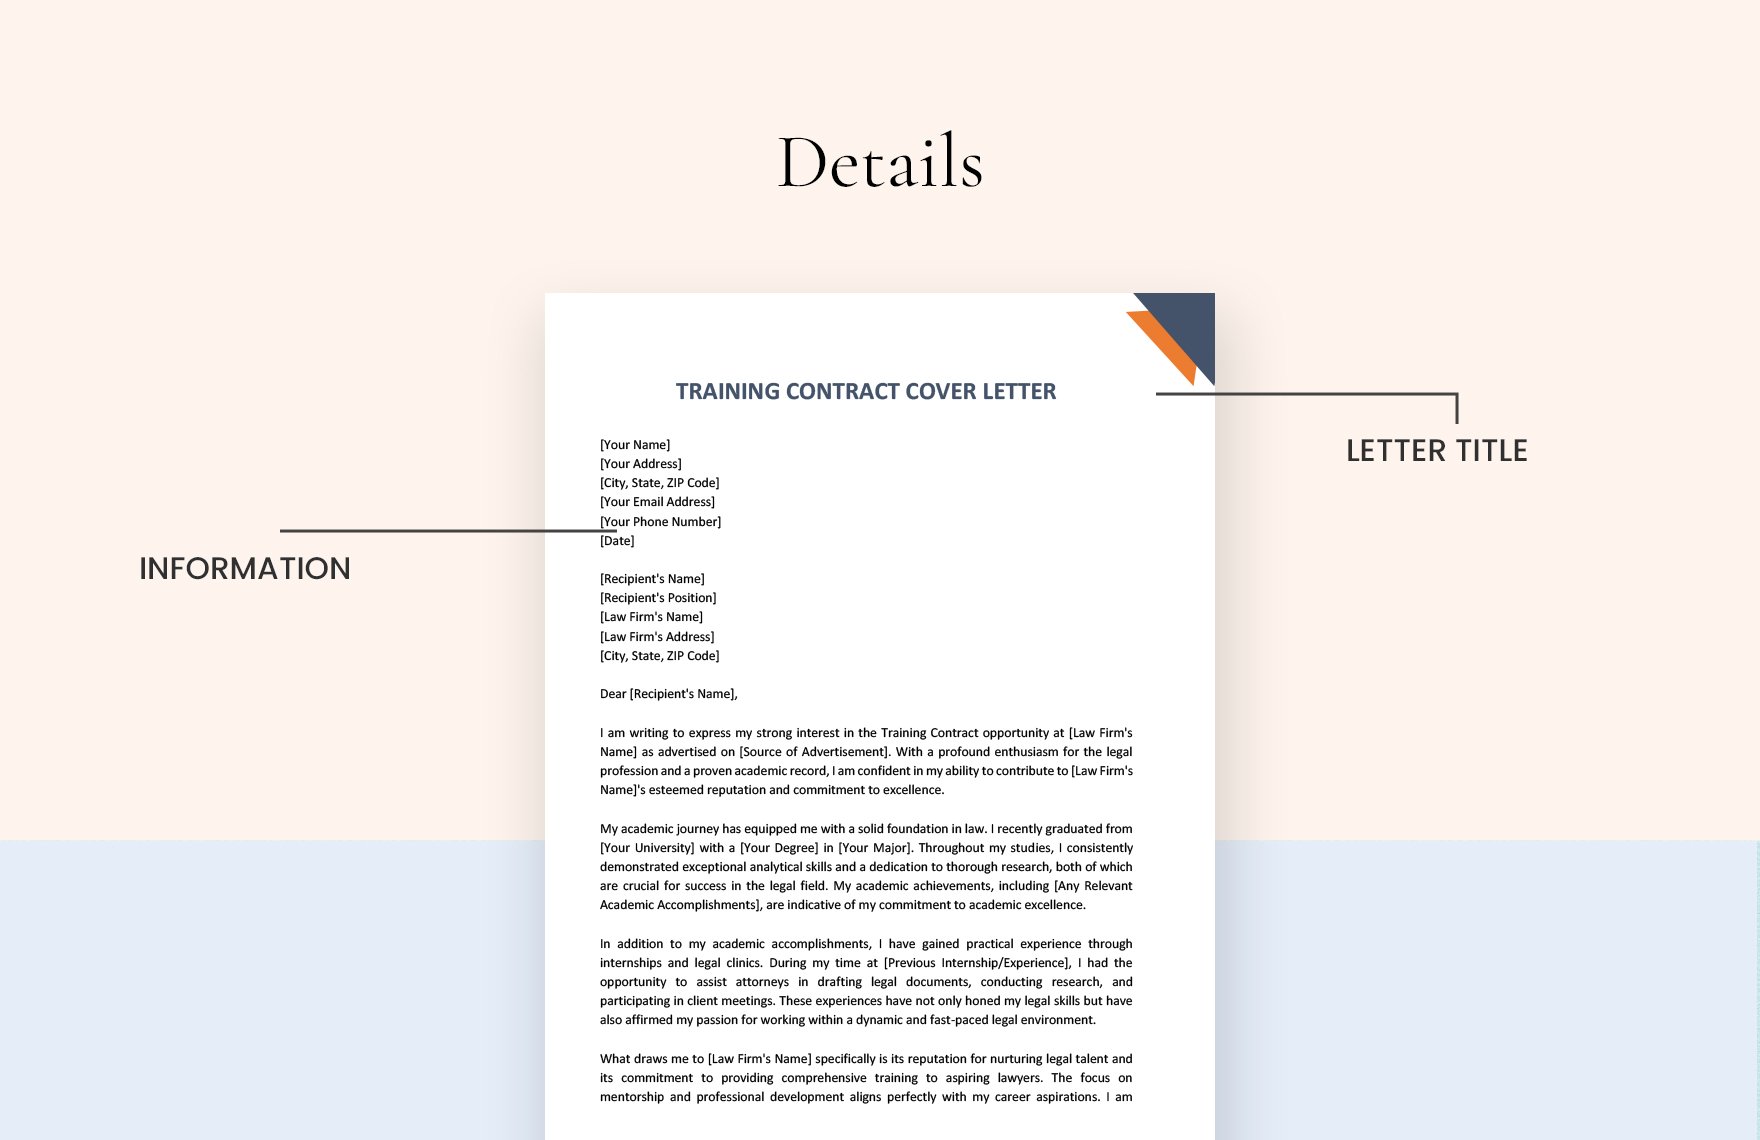 Training Contract Cover Letter